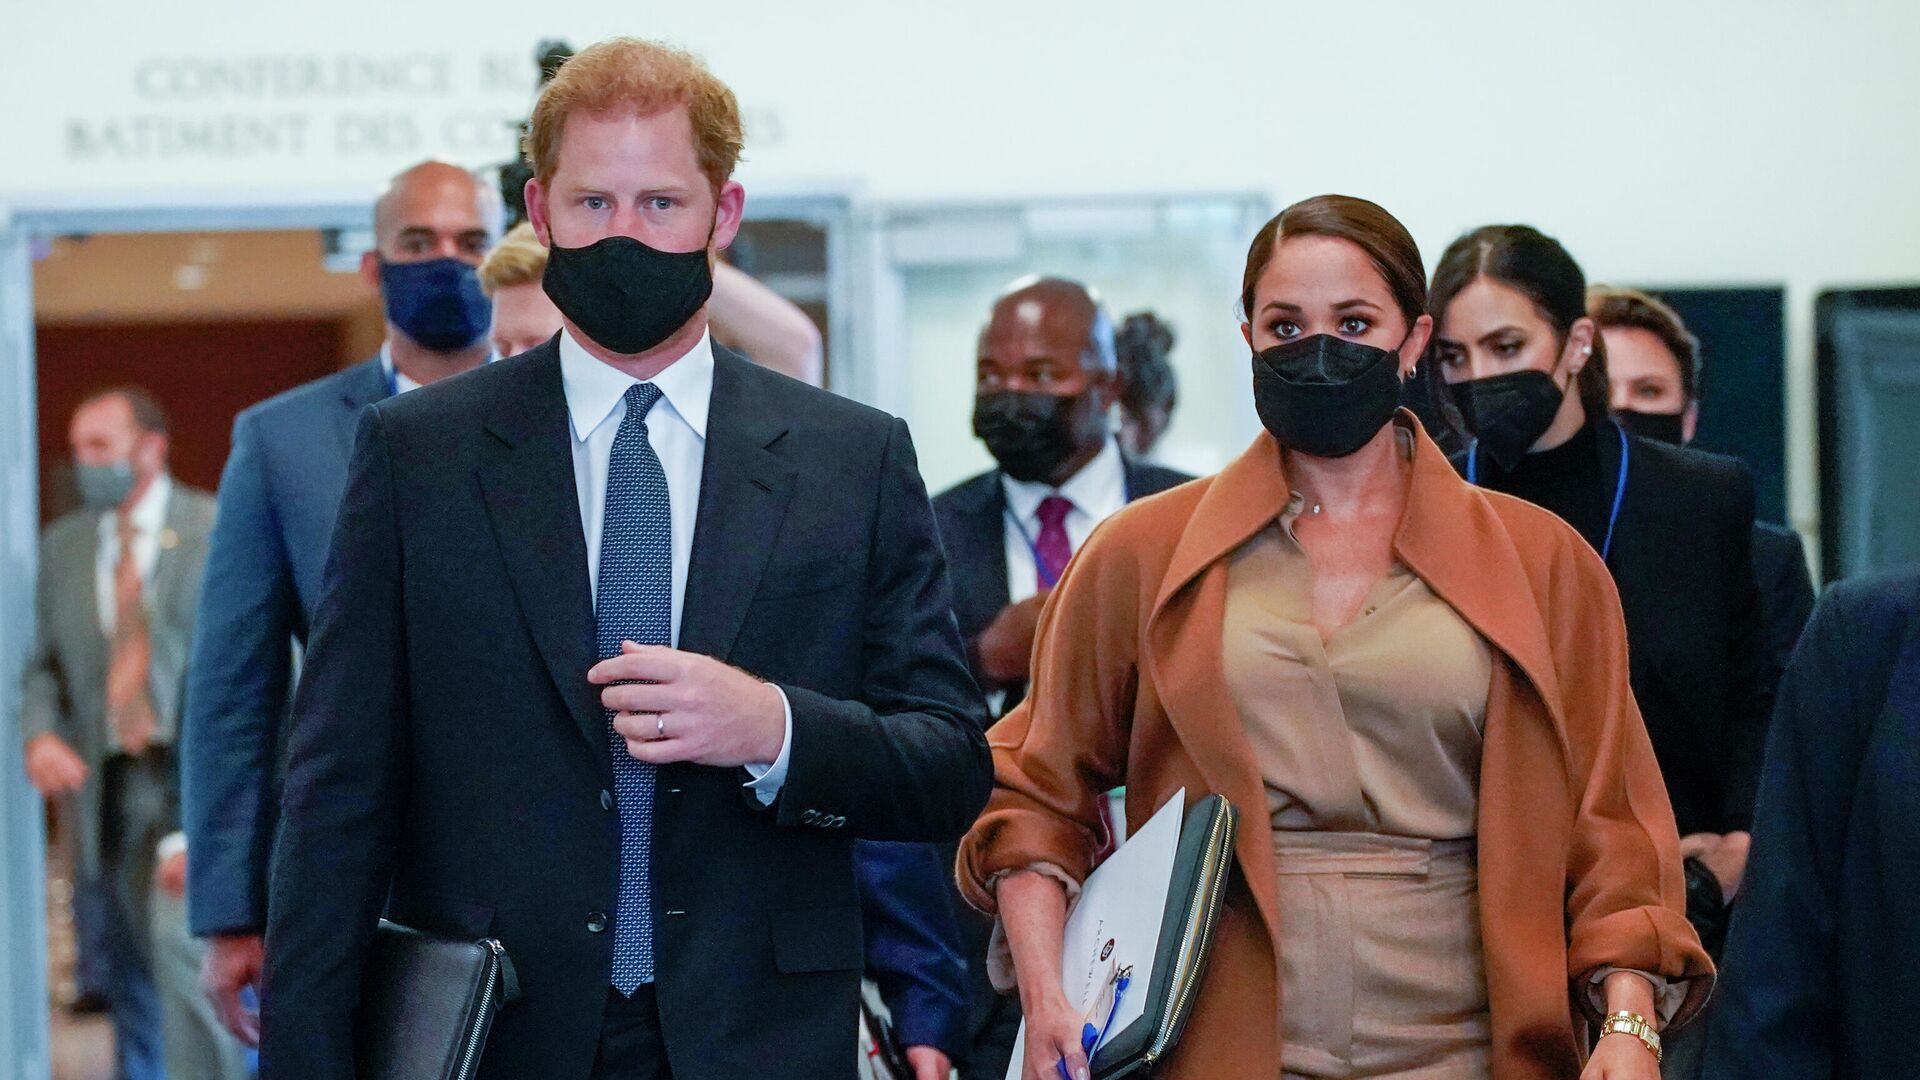 Prince Harry and Meghan, the Duke and Duchess of Sussex are escorted as they leave the United Nations headquarters after a visit during 76th session of the United Nations General Assembly, Saturday, Sept. 25, 2021 - Sputnik International, 1920, 31.01.2022